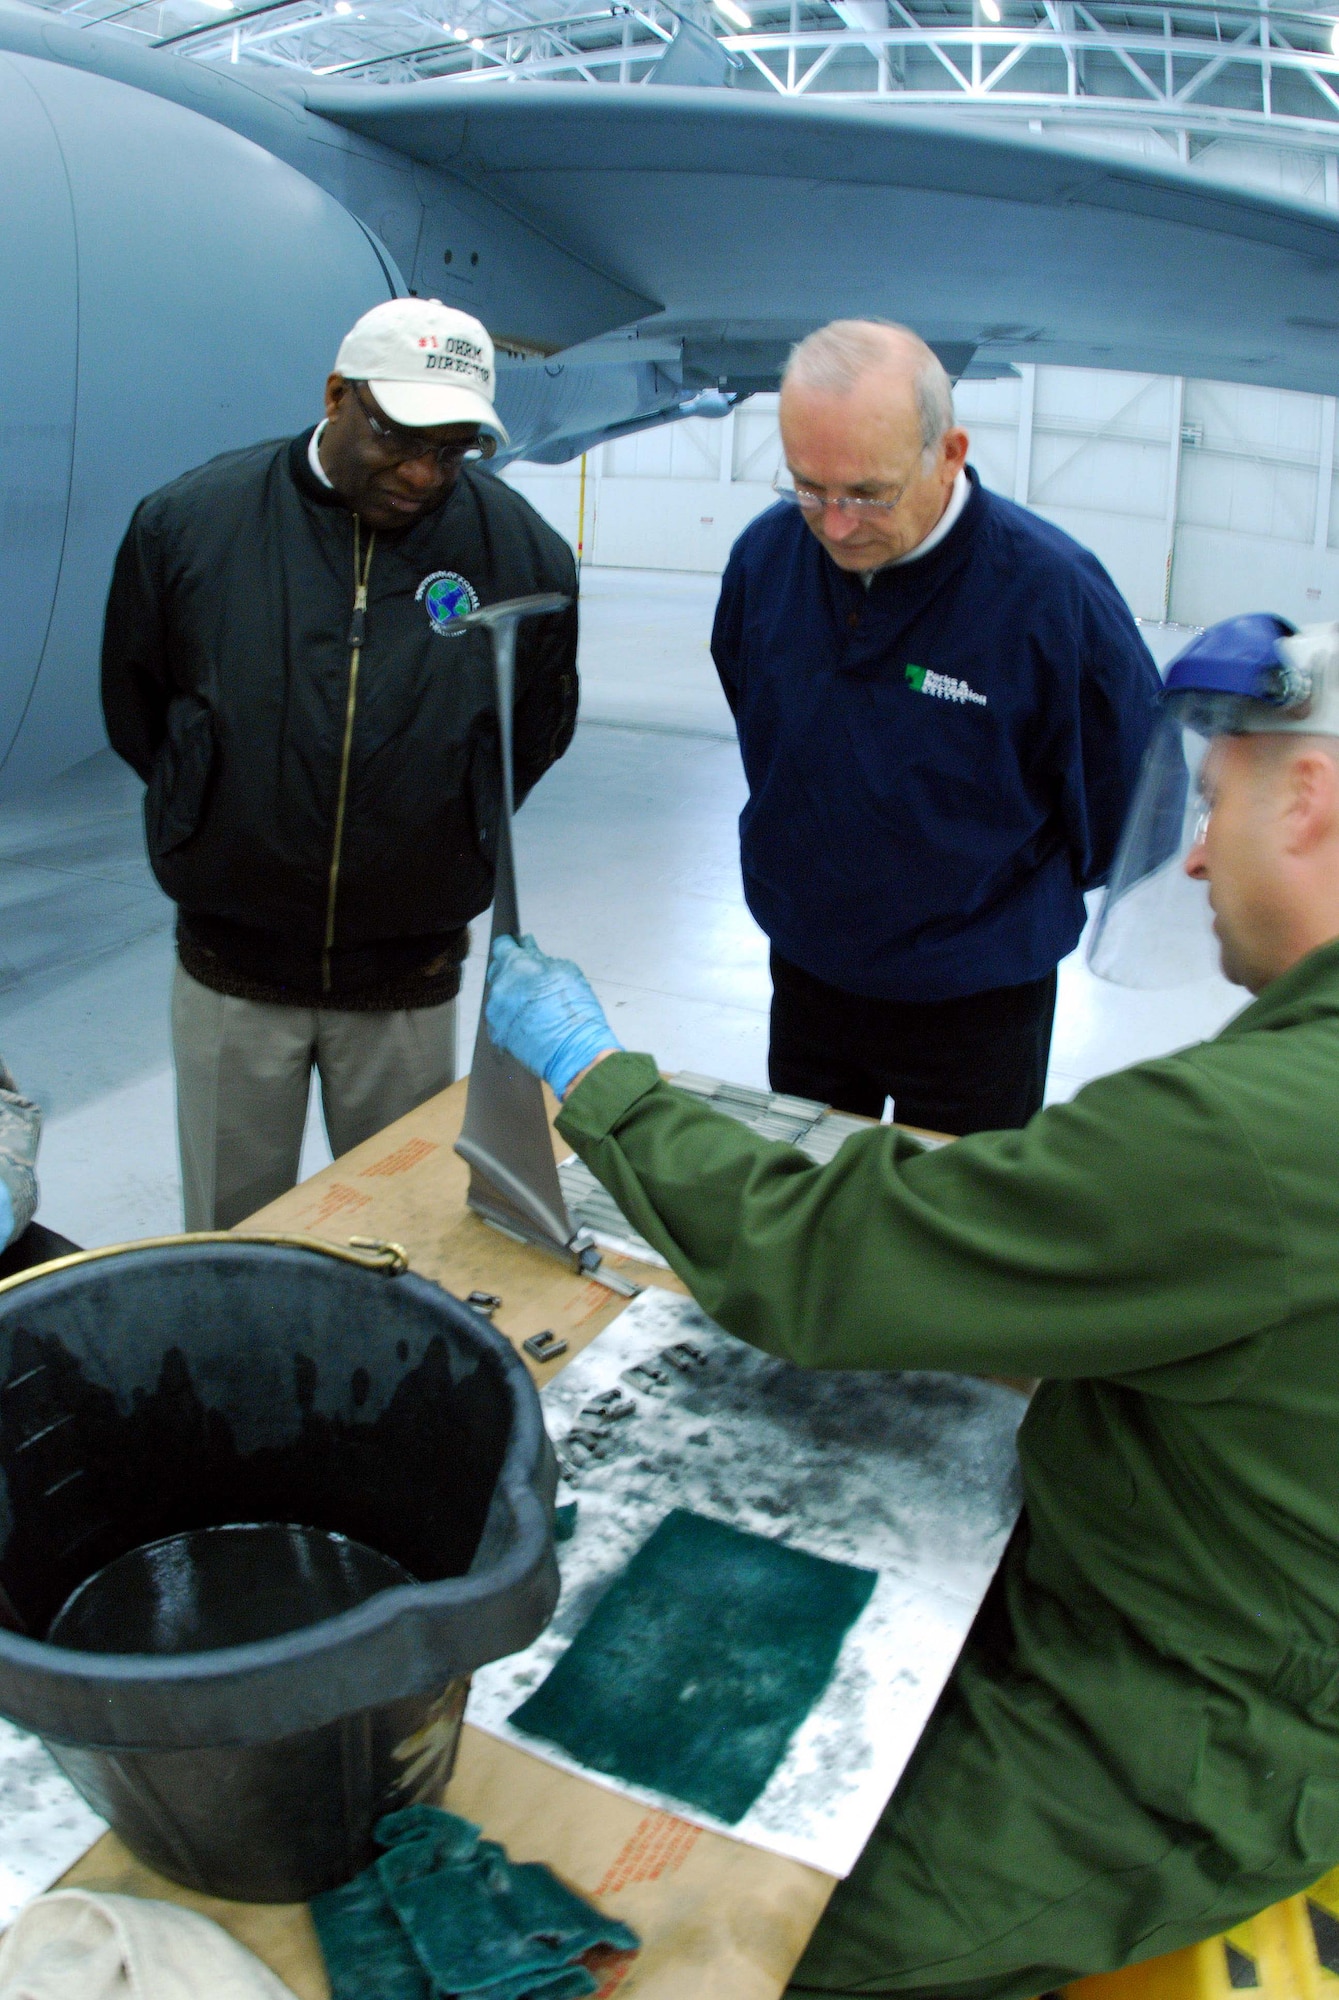 Lee Schiek, 459th Air Refueling Wing honorary commander, and Donald Bridgeman, 459th Mission Support Group honorary commander, observe Tech. Sgt. David Campbell, 459th Maintenance Group jet propulsion mechanic cleans lube off retainers and spacers which is scheduled every 1500 flying hours.  (U.S. Air Force photo/ Senior Airman Ashley Crawford)